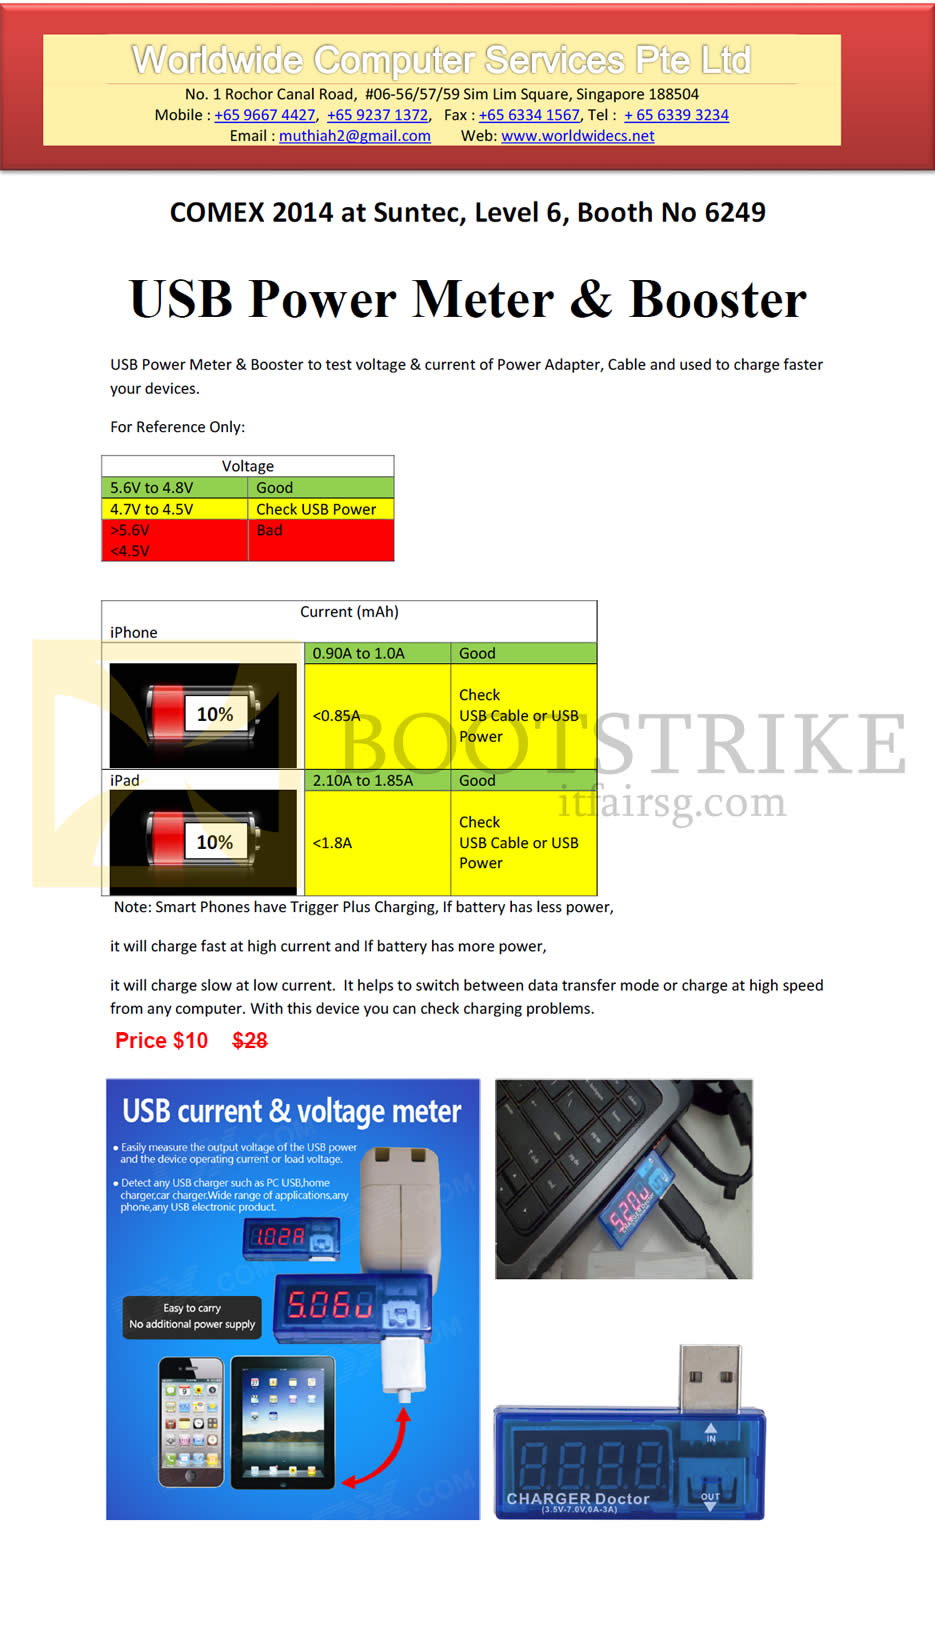 COMEX 2014 price list image brochure of Worldwide Computer Services USB Power Meter, Booster